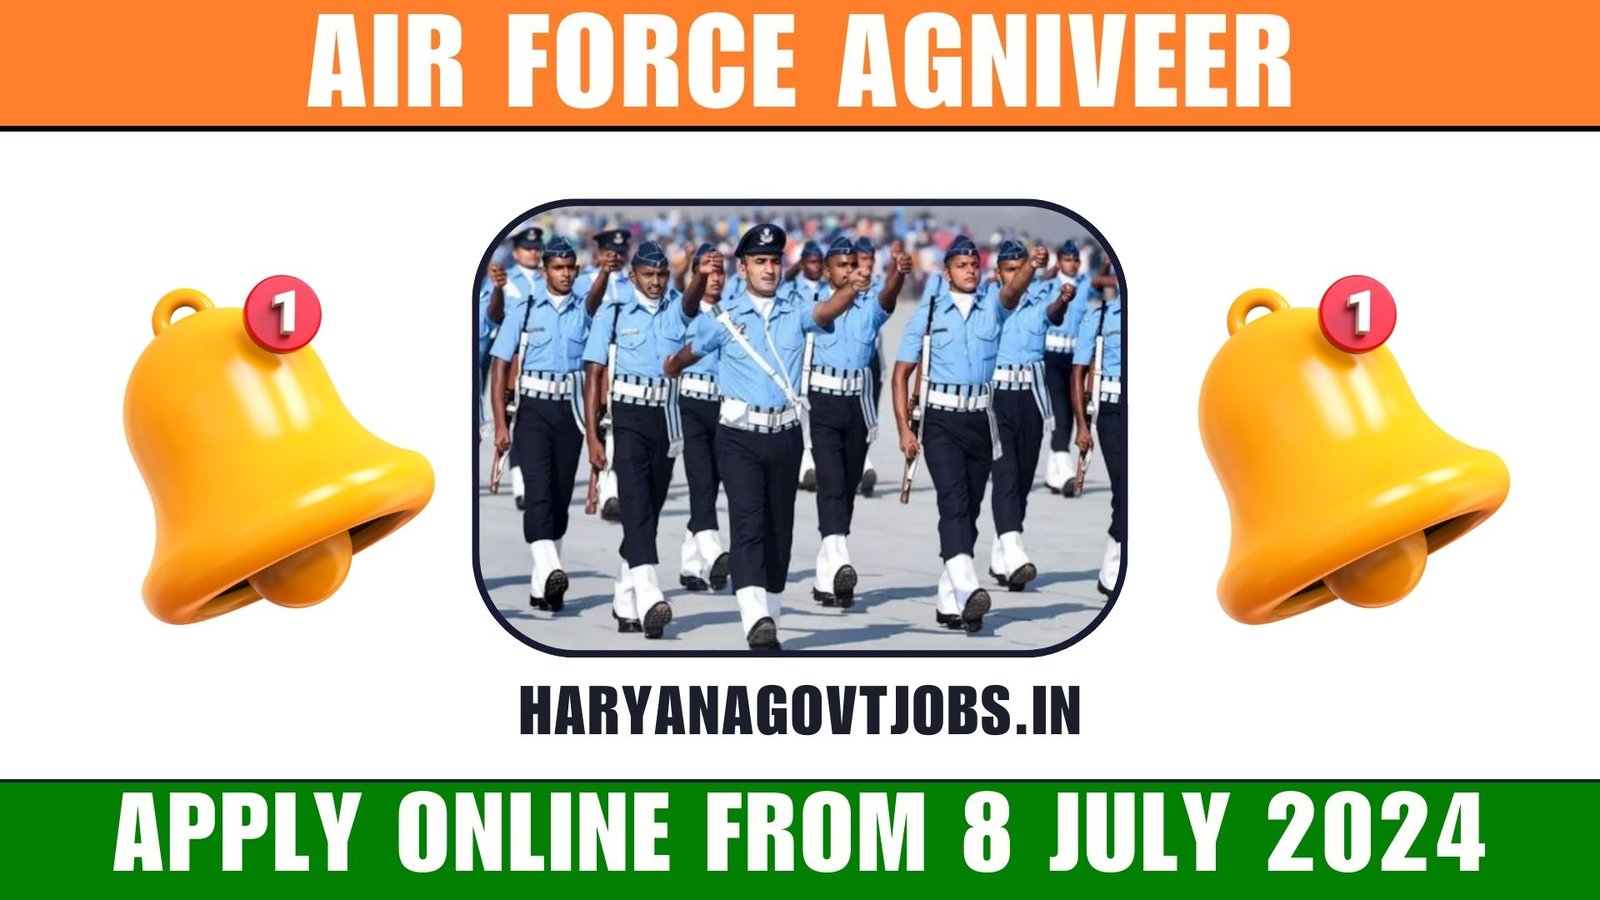 Air Force Agniveer 02/2025 Notification Out, Apply Online From 8 July 2024